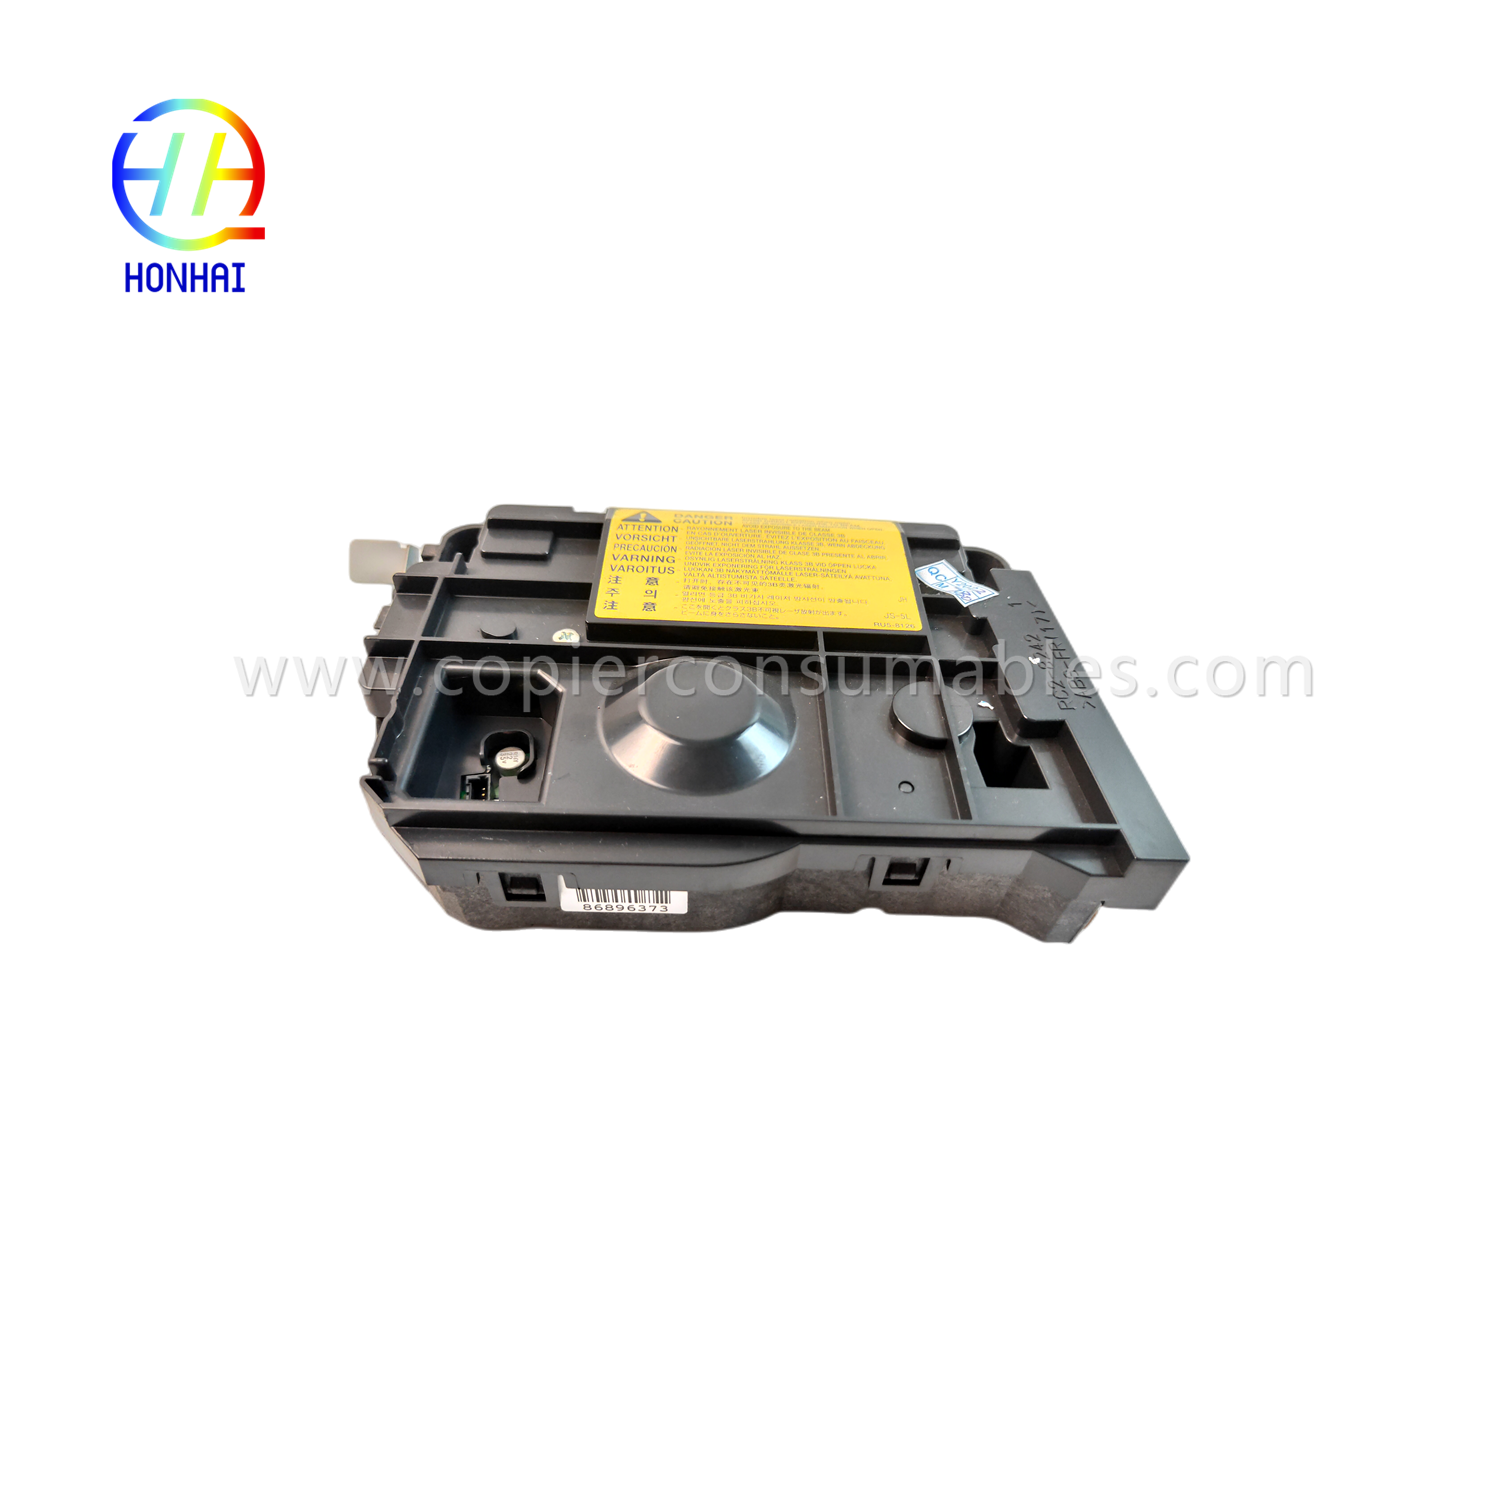 Laser Scanner for HP P2035  P2055 Series RM1-6382 (2)